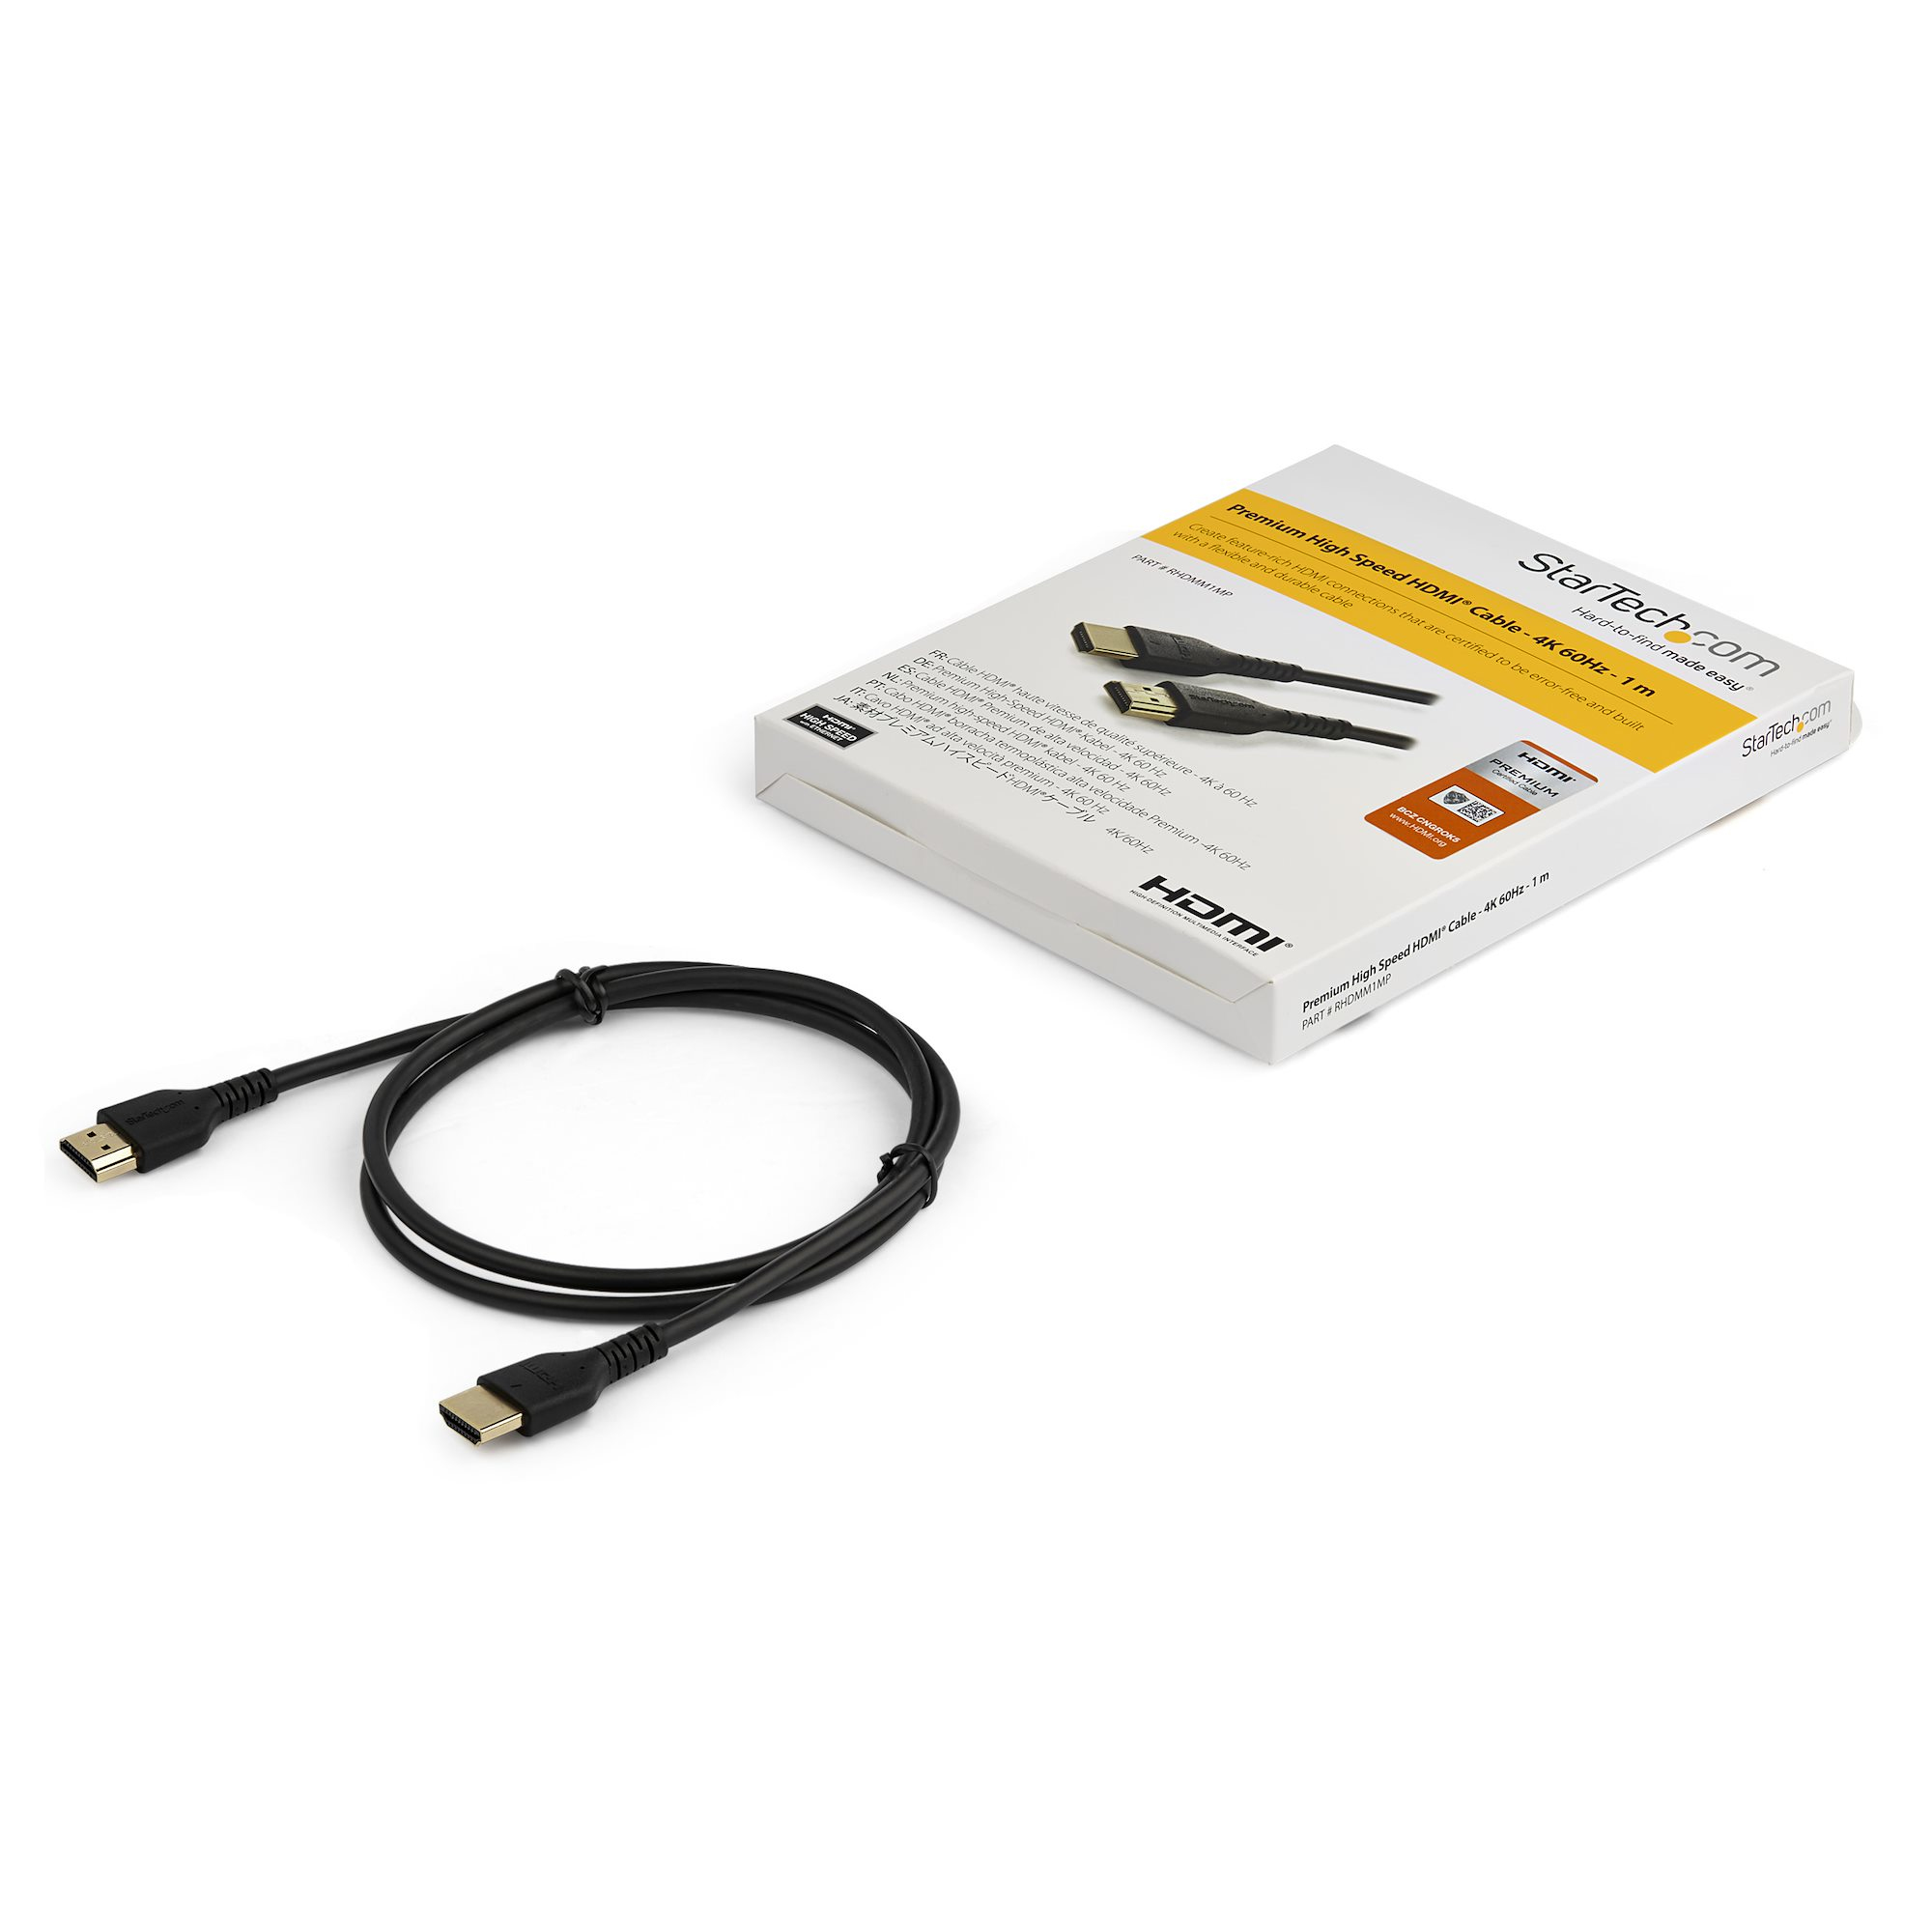  StarTech.com 3 ft High Speed HDMI Cable with Ethernet